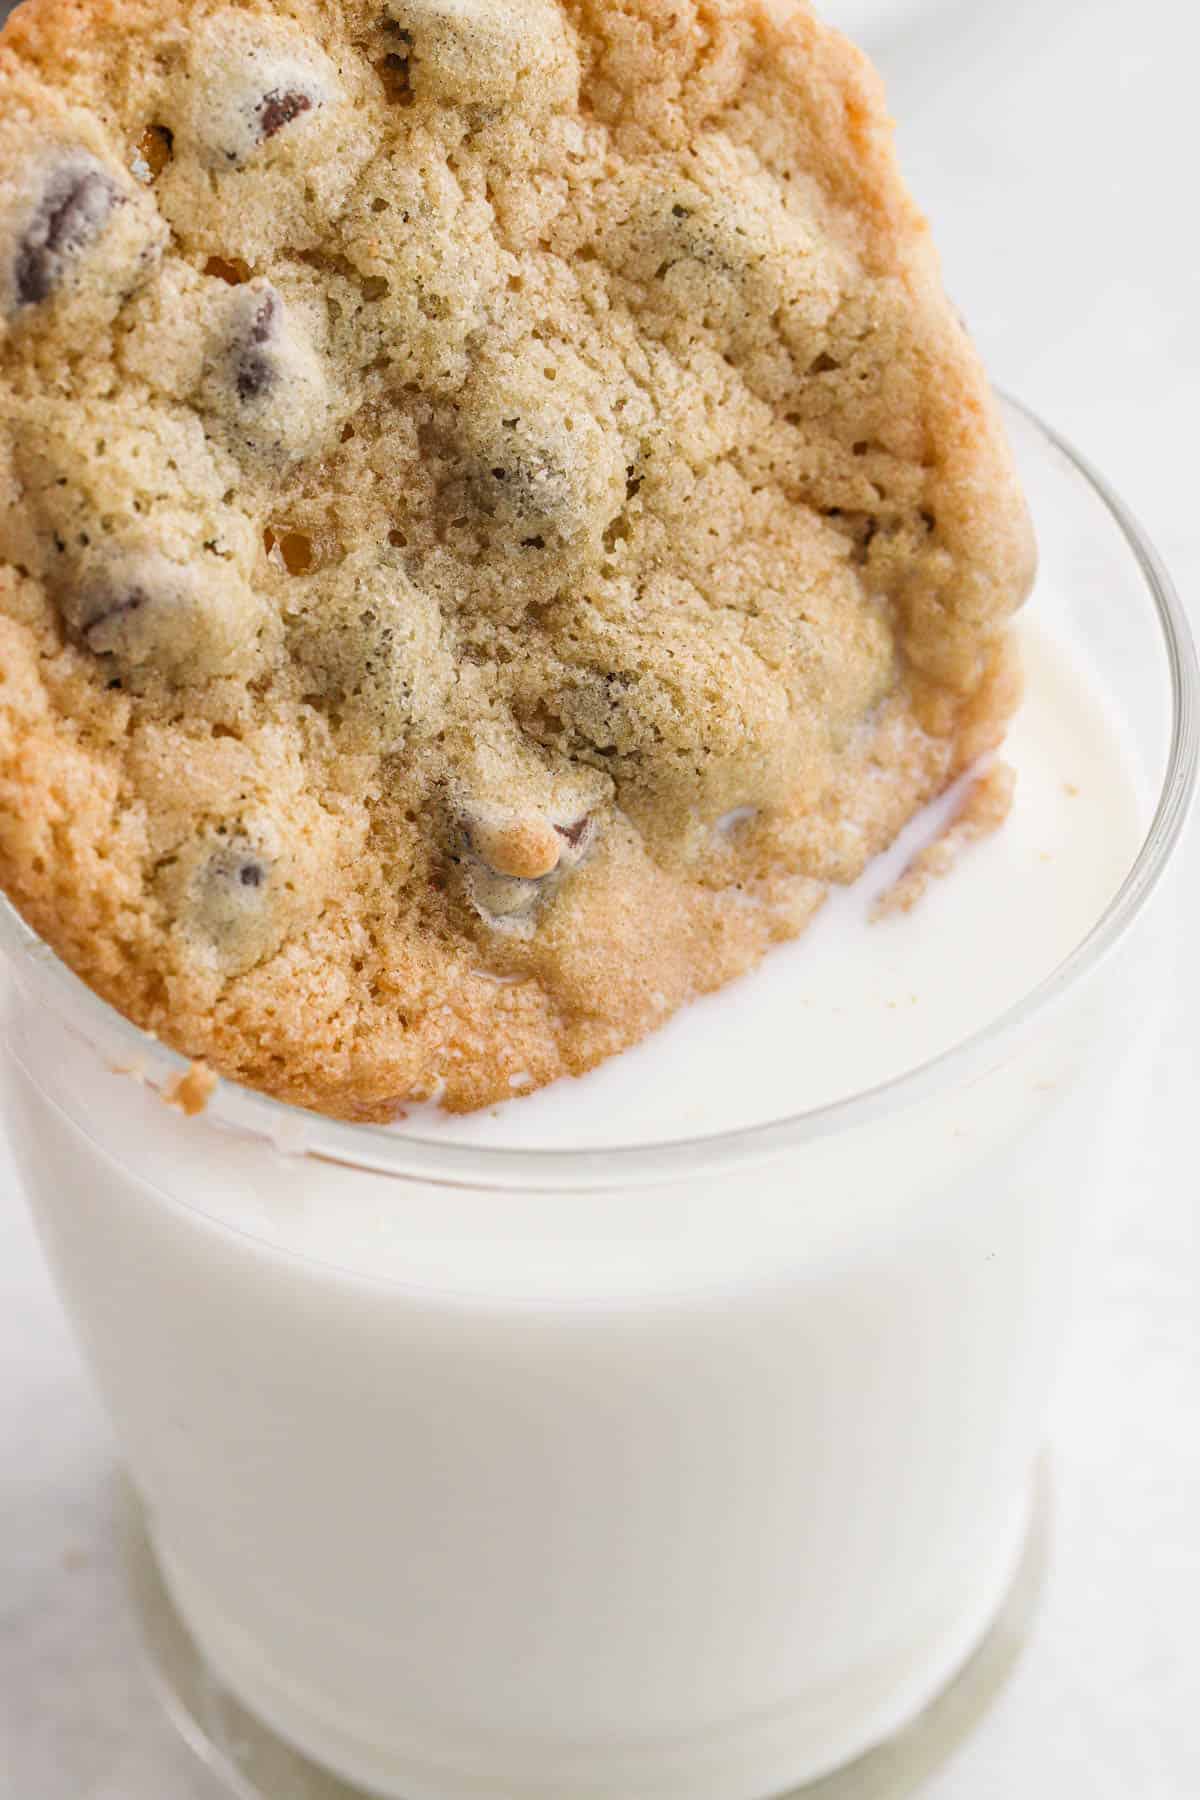 A crispy chocolate chip cookie dunking into a glass of milk.